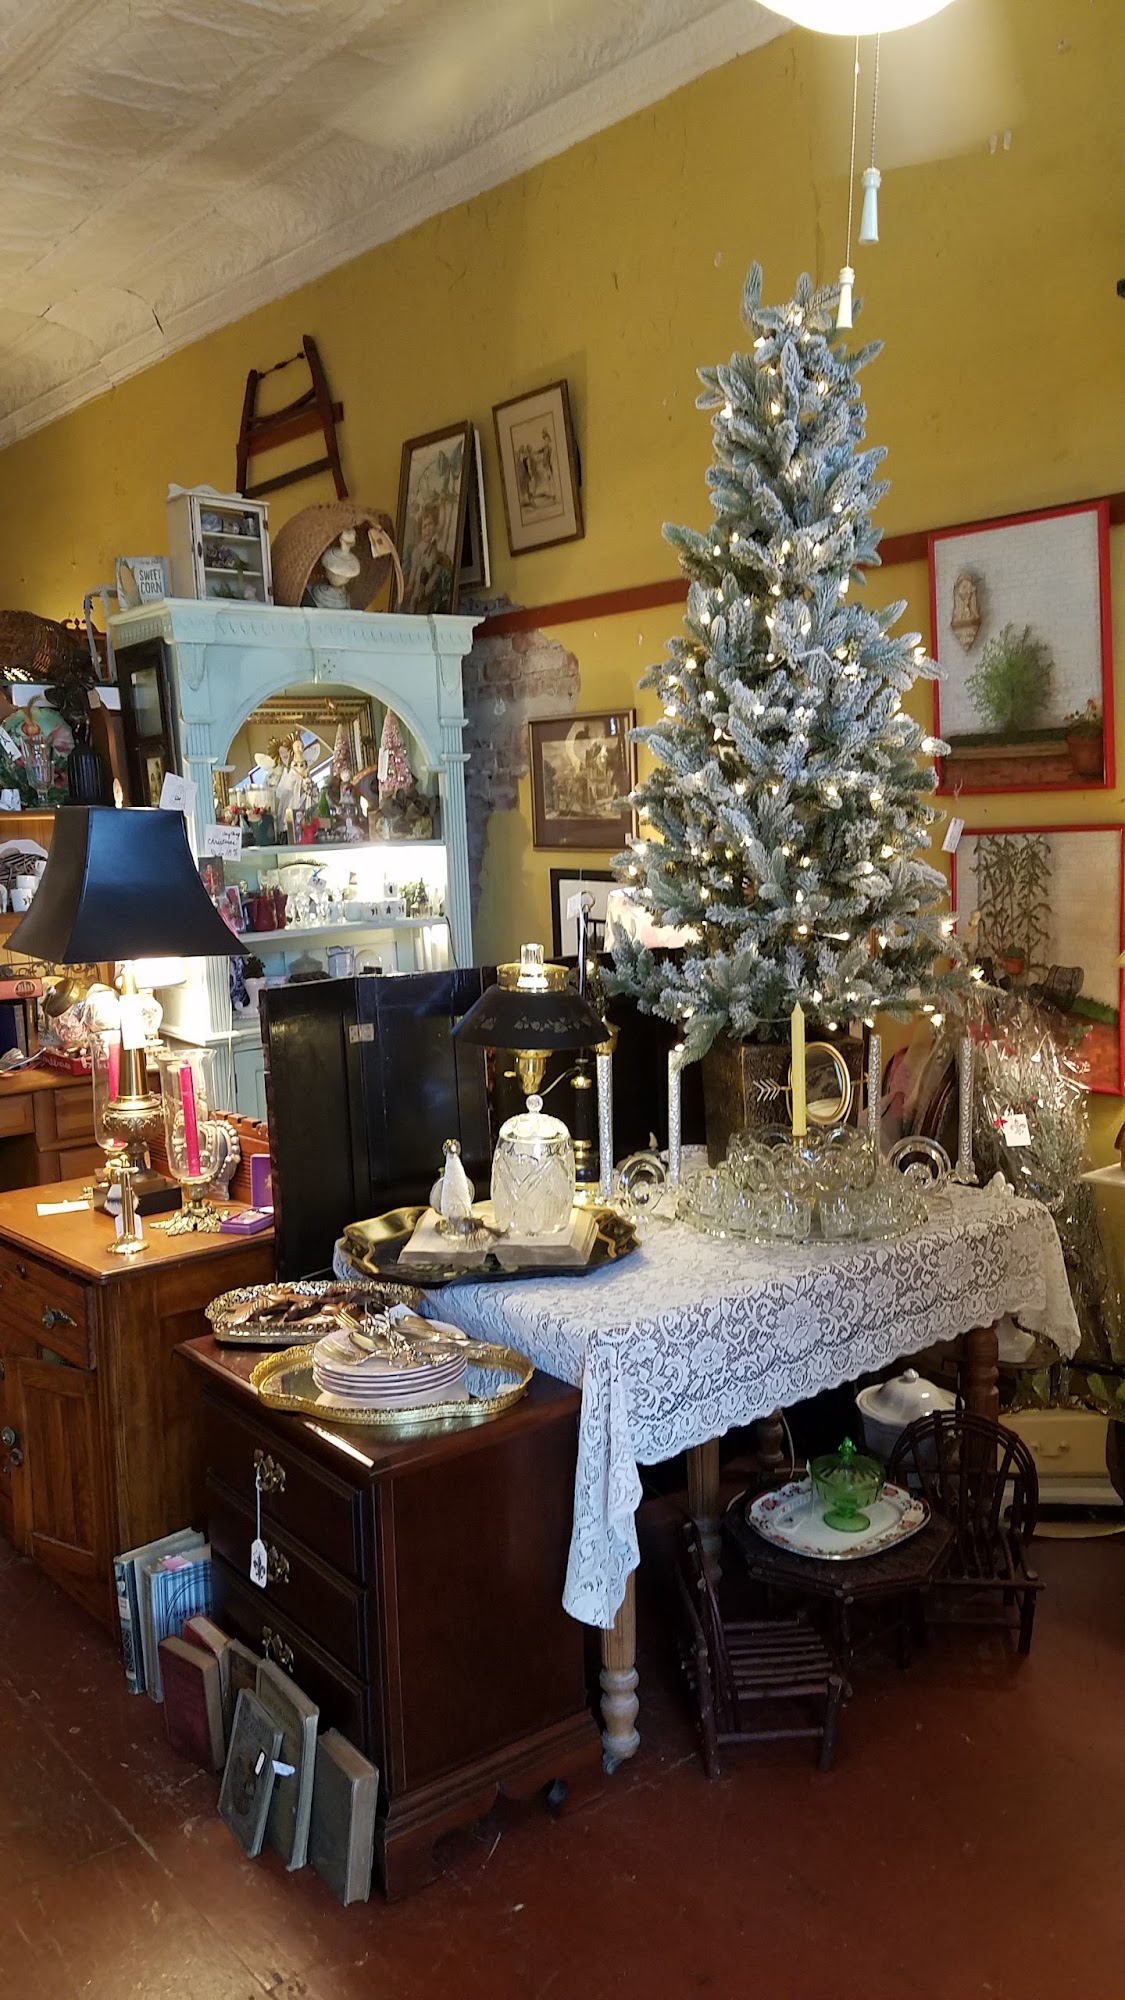 Sugar Maples Antiques & Gifts